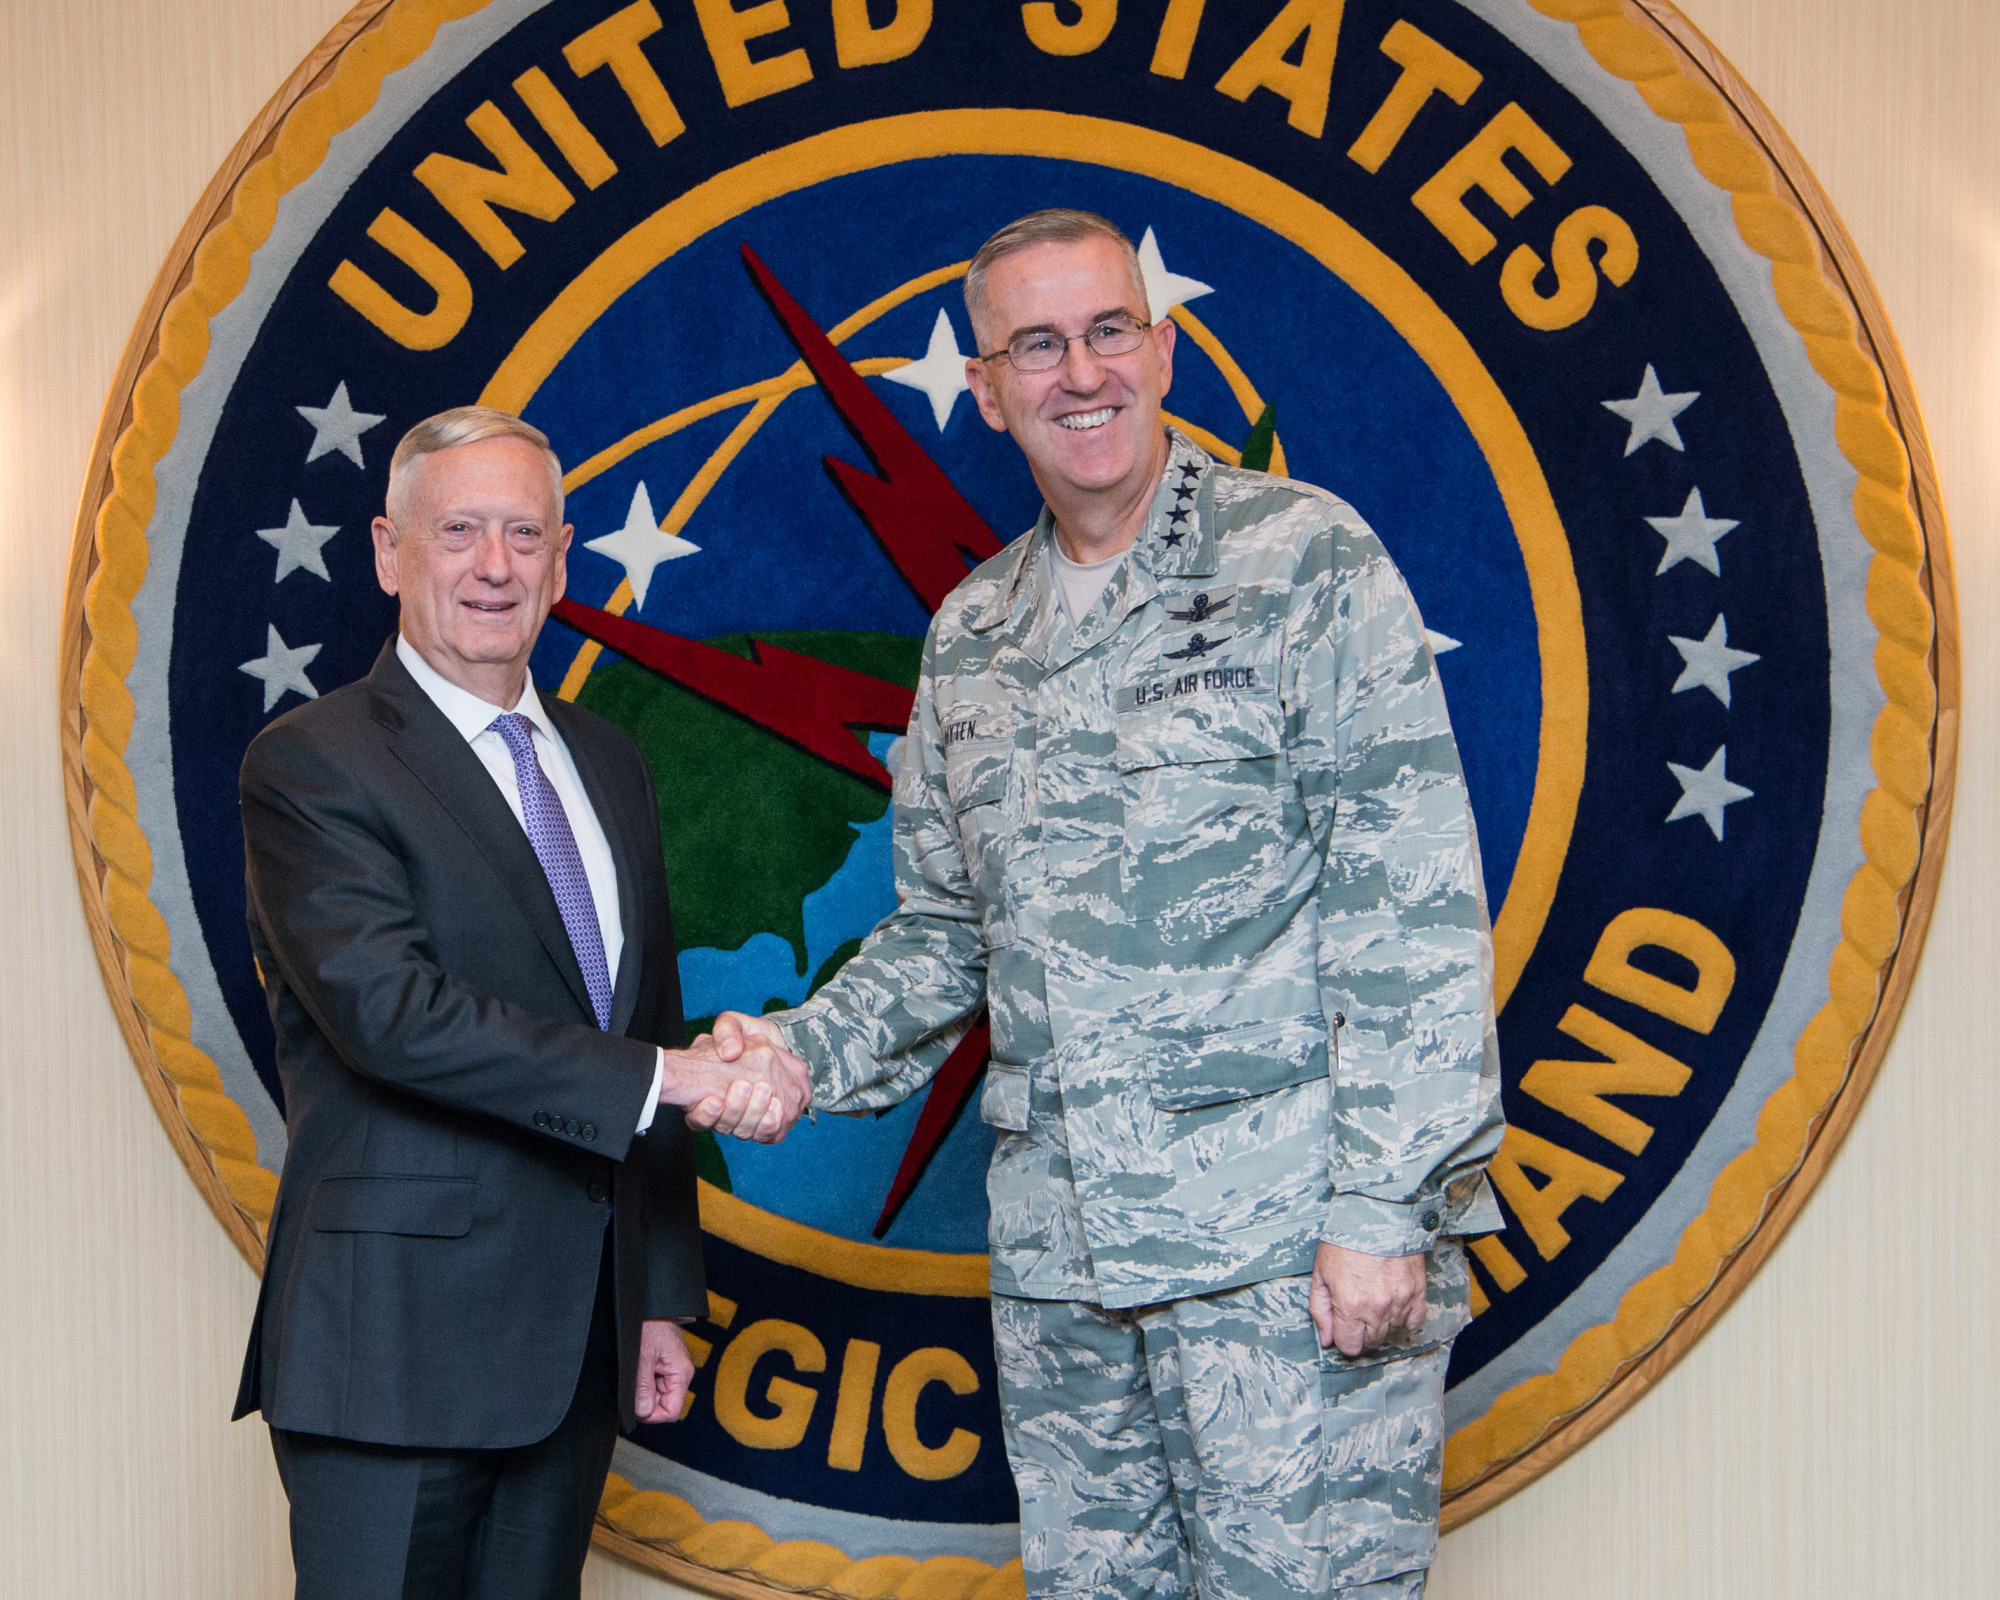 U.S. Secretary of Defense Jim Mattis poses Sept. 14 with Strategic Command head Gen. John E. Hyten, who would be in command of U.S. nuclear forces in the event the president orders them into combat. Mattis received classified briefings to aid his nuclear posture review, a reassessment of U.S. nuclear weapons policy. | OFFICE OF THE SECRETARY OF DEFENSE PUBLIC AFFAIRS